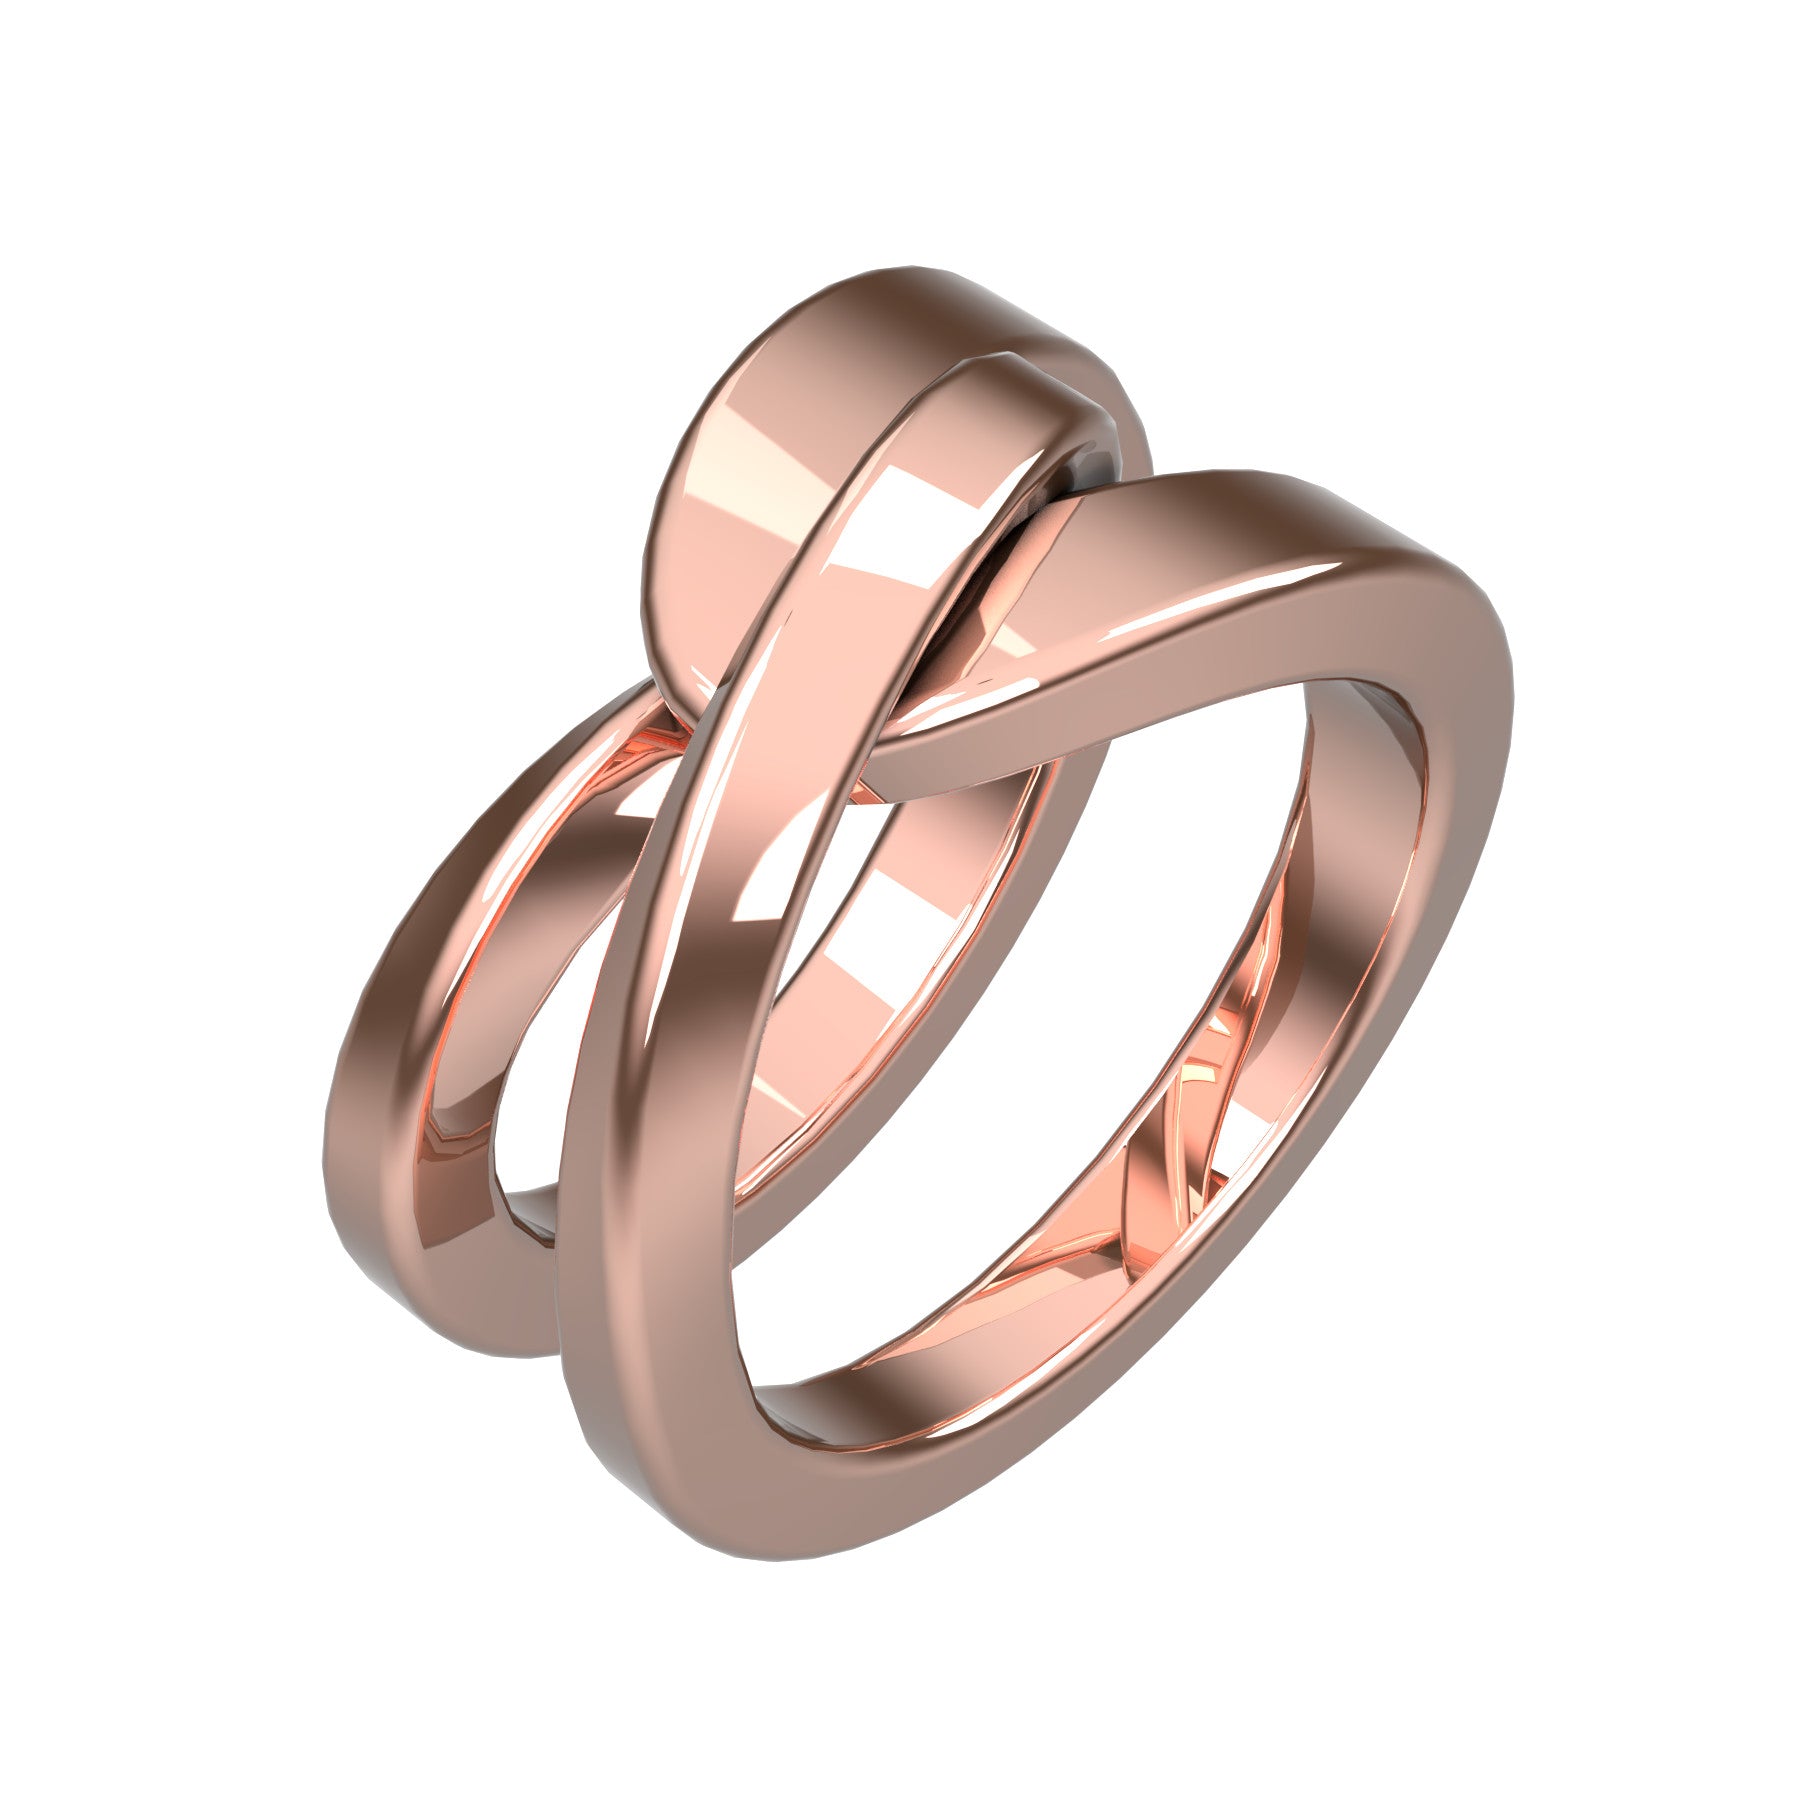 Lier ring, 18 k pink gold, weight about 14,2 g (0.50 oz), width 12,3 mm max